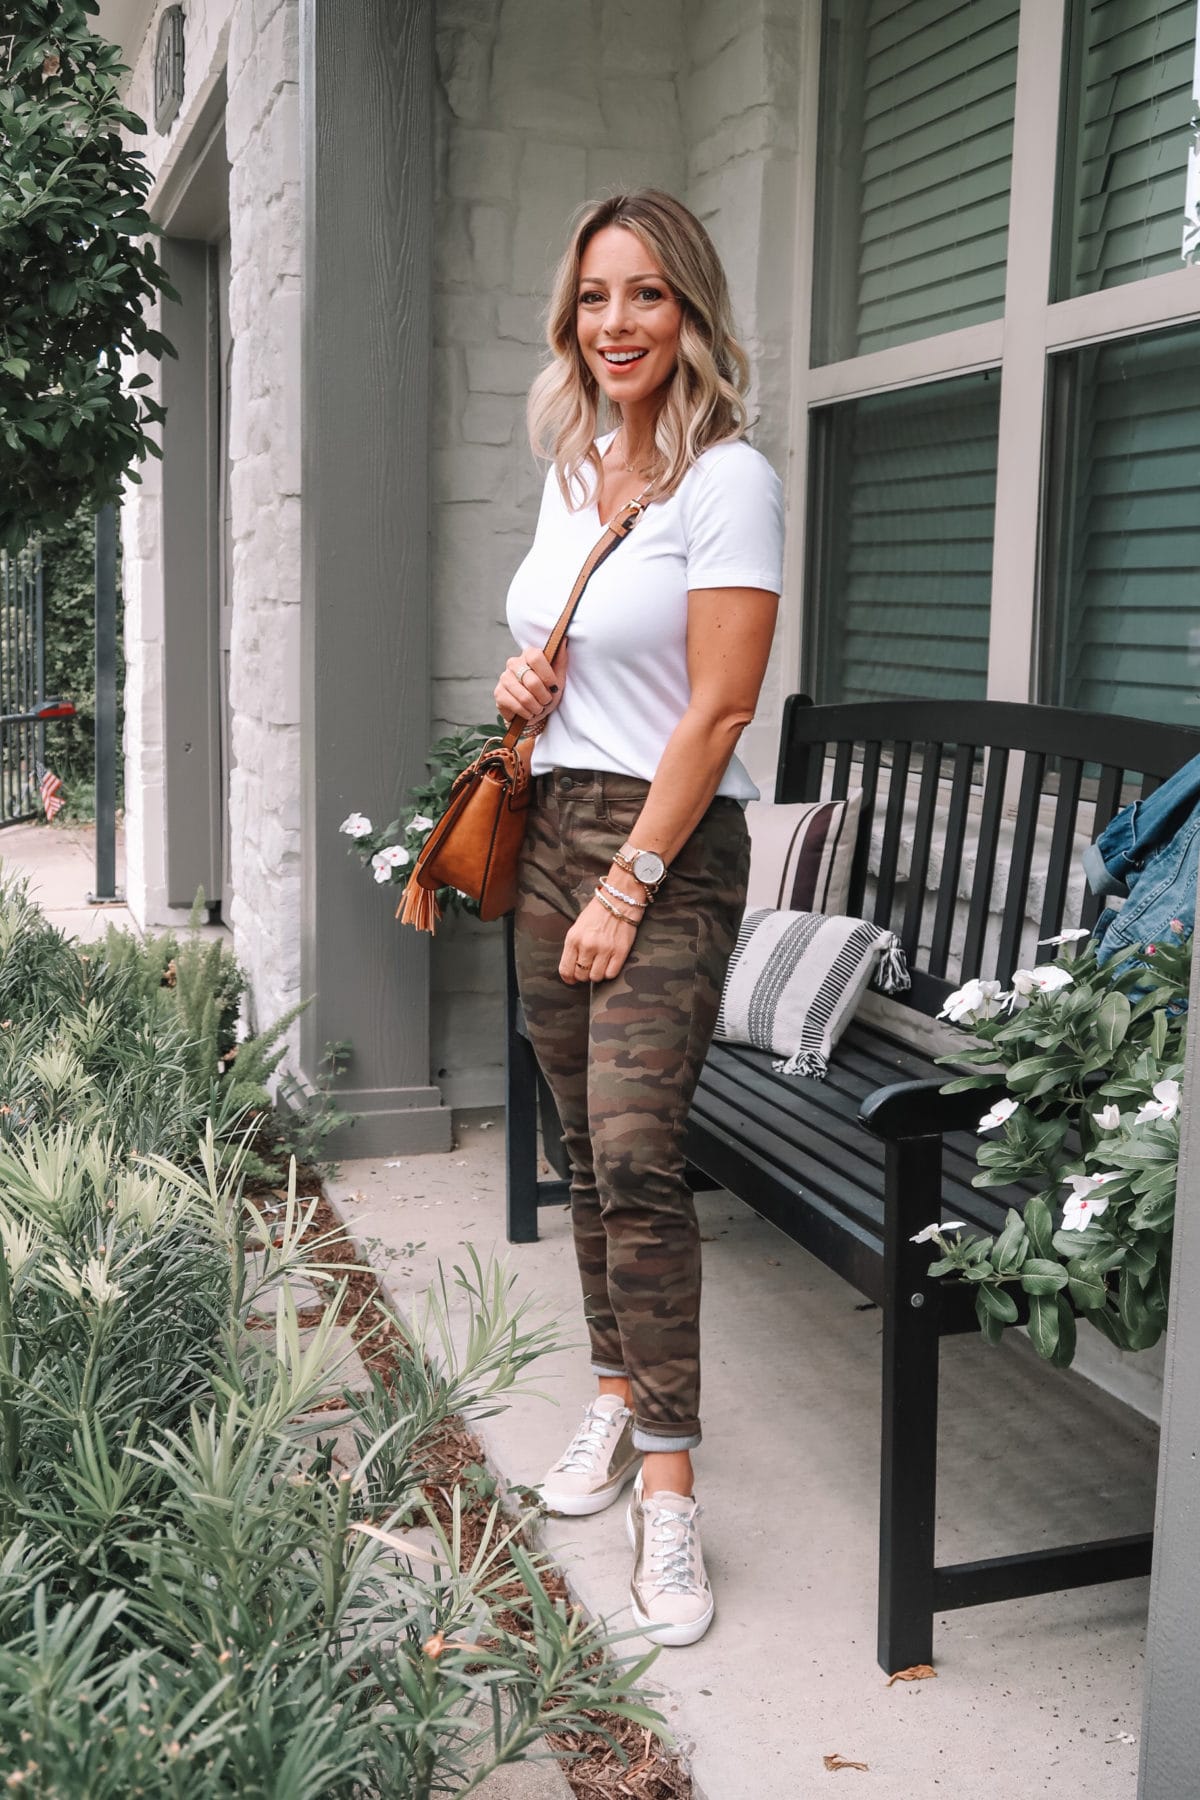 Outfits Lately, Amazon Essentials Tee, Camo Joggers, Star Sneakers, Crossbody Bag